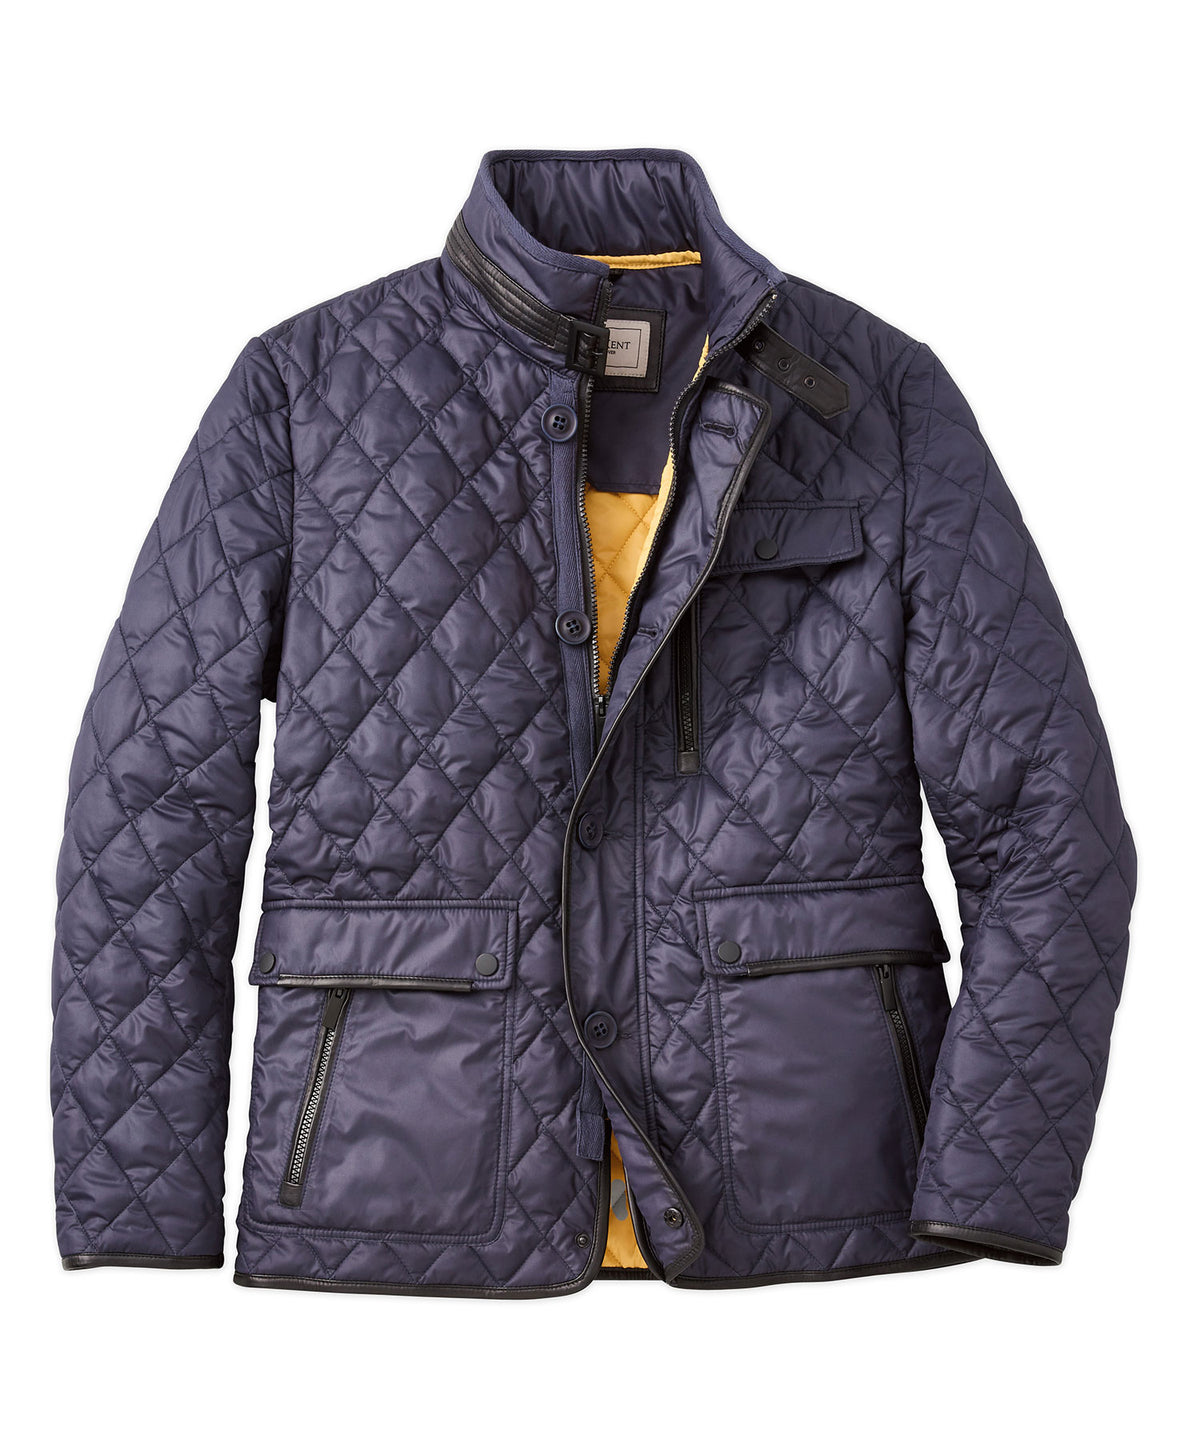 Major Diamond-Quilted Jacket